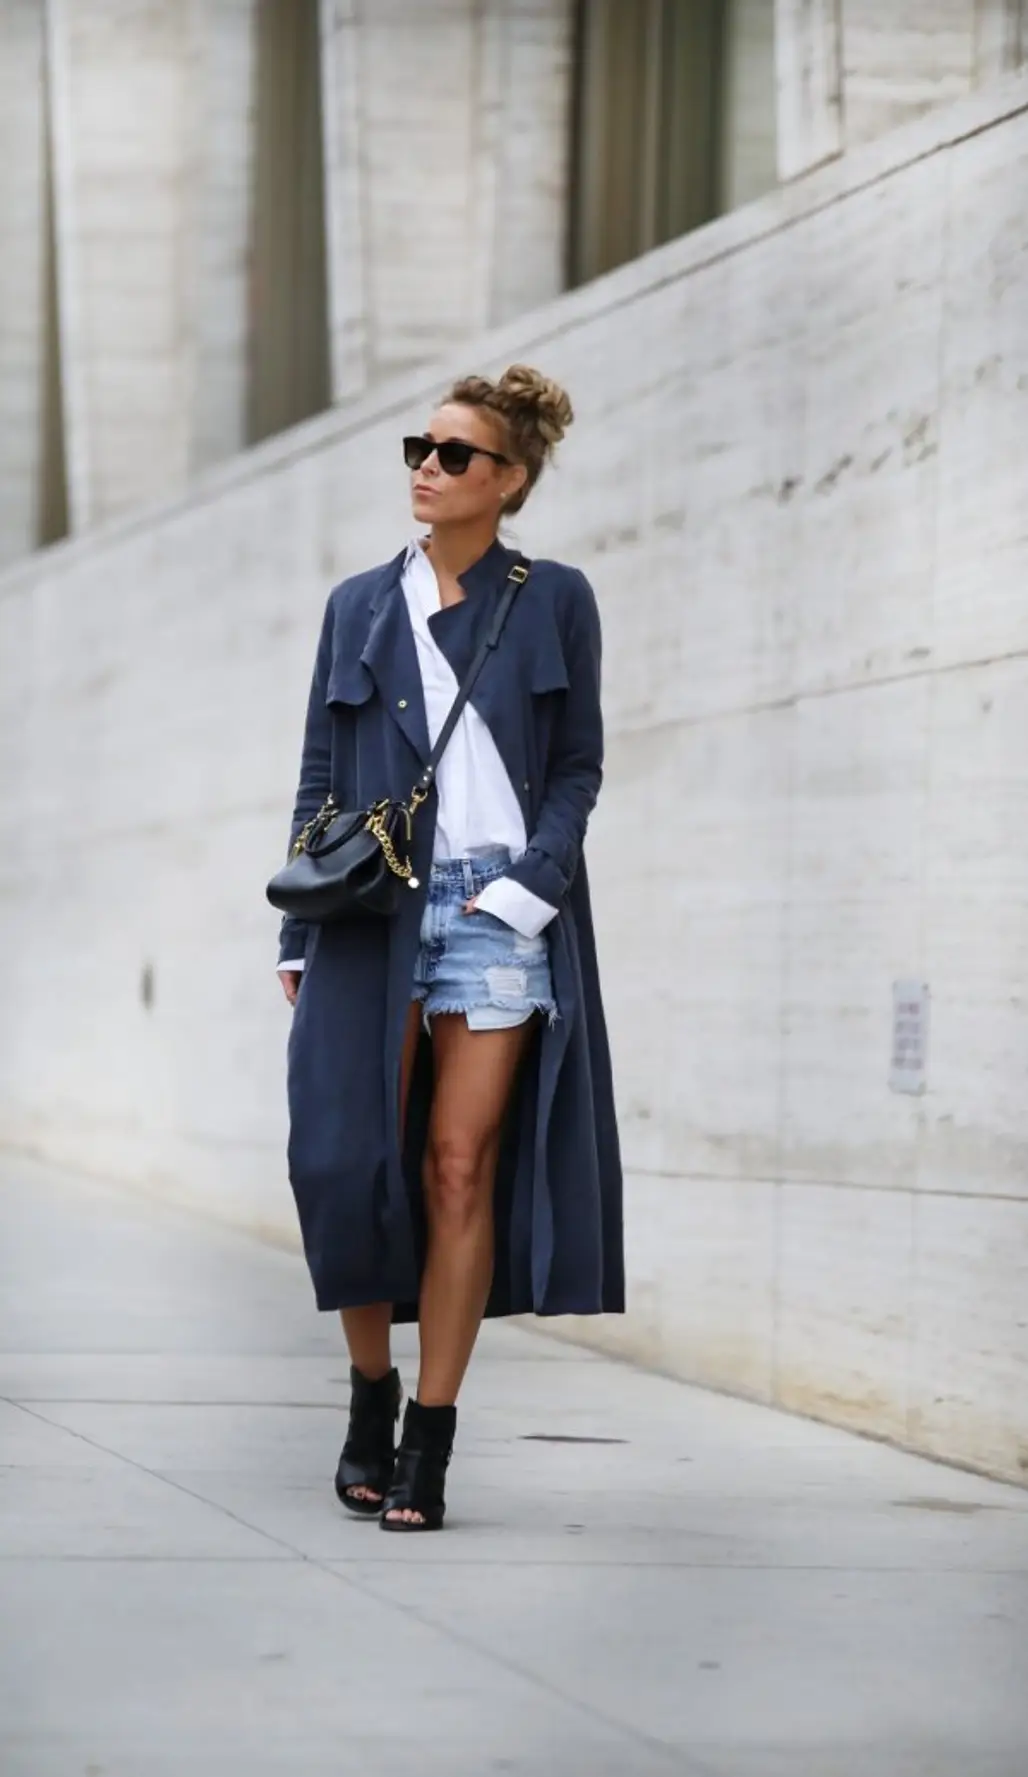 The Trenchcoat and Peep Toe Combo